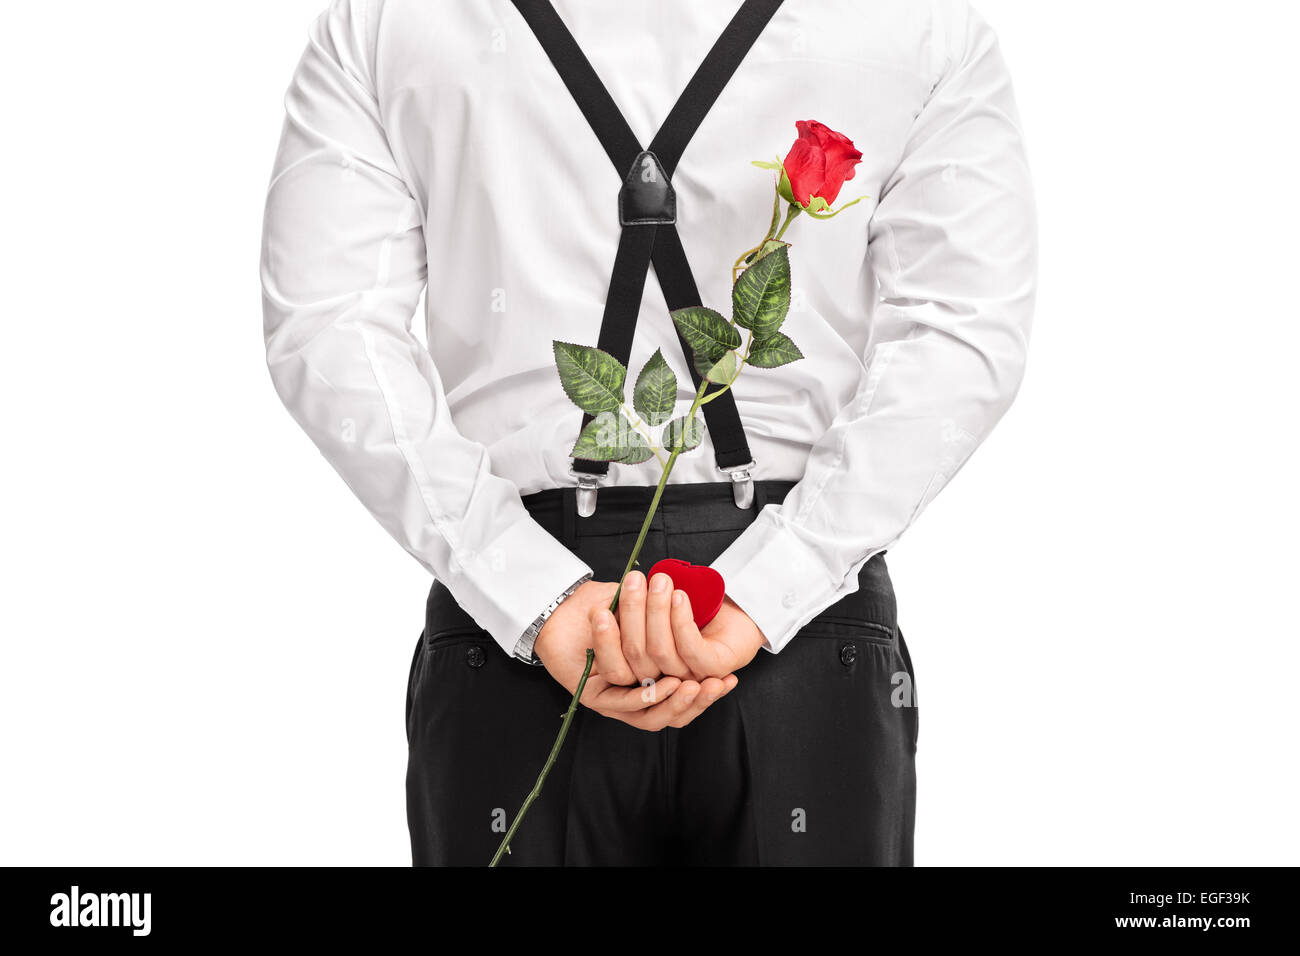 Close-up on a man holding flower and a red box behind his back isolated on white background Stock Photo